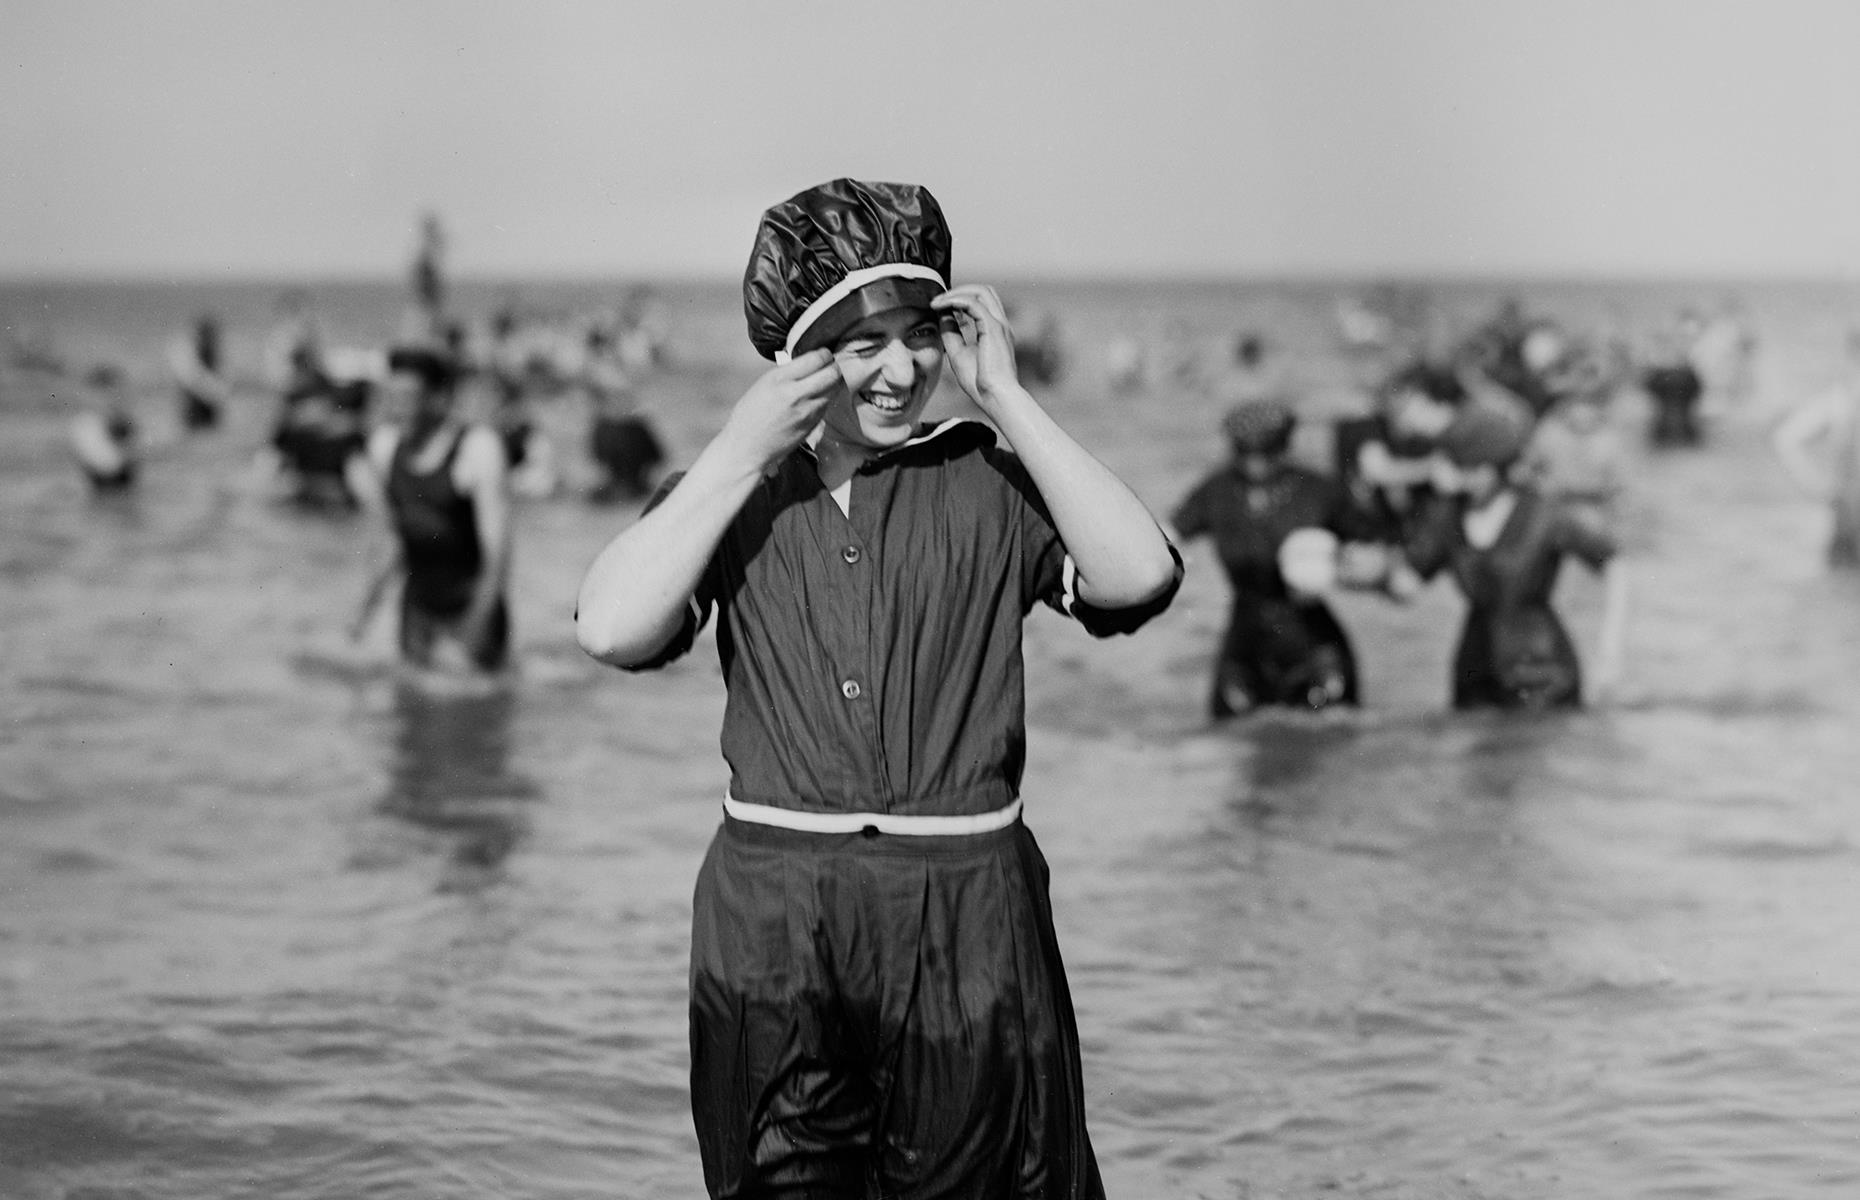 New England is another region that has drawn vacationers for more than a century. This shot was taken in the early 1900s and captures a woman squinting from the sun as she cools off in the Atlantic Ocean. Note the conservative swimwear which would have been commonplace for the time.